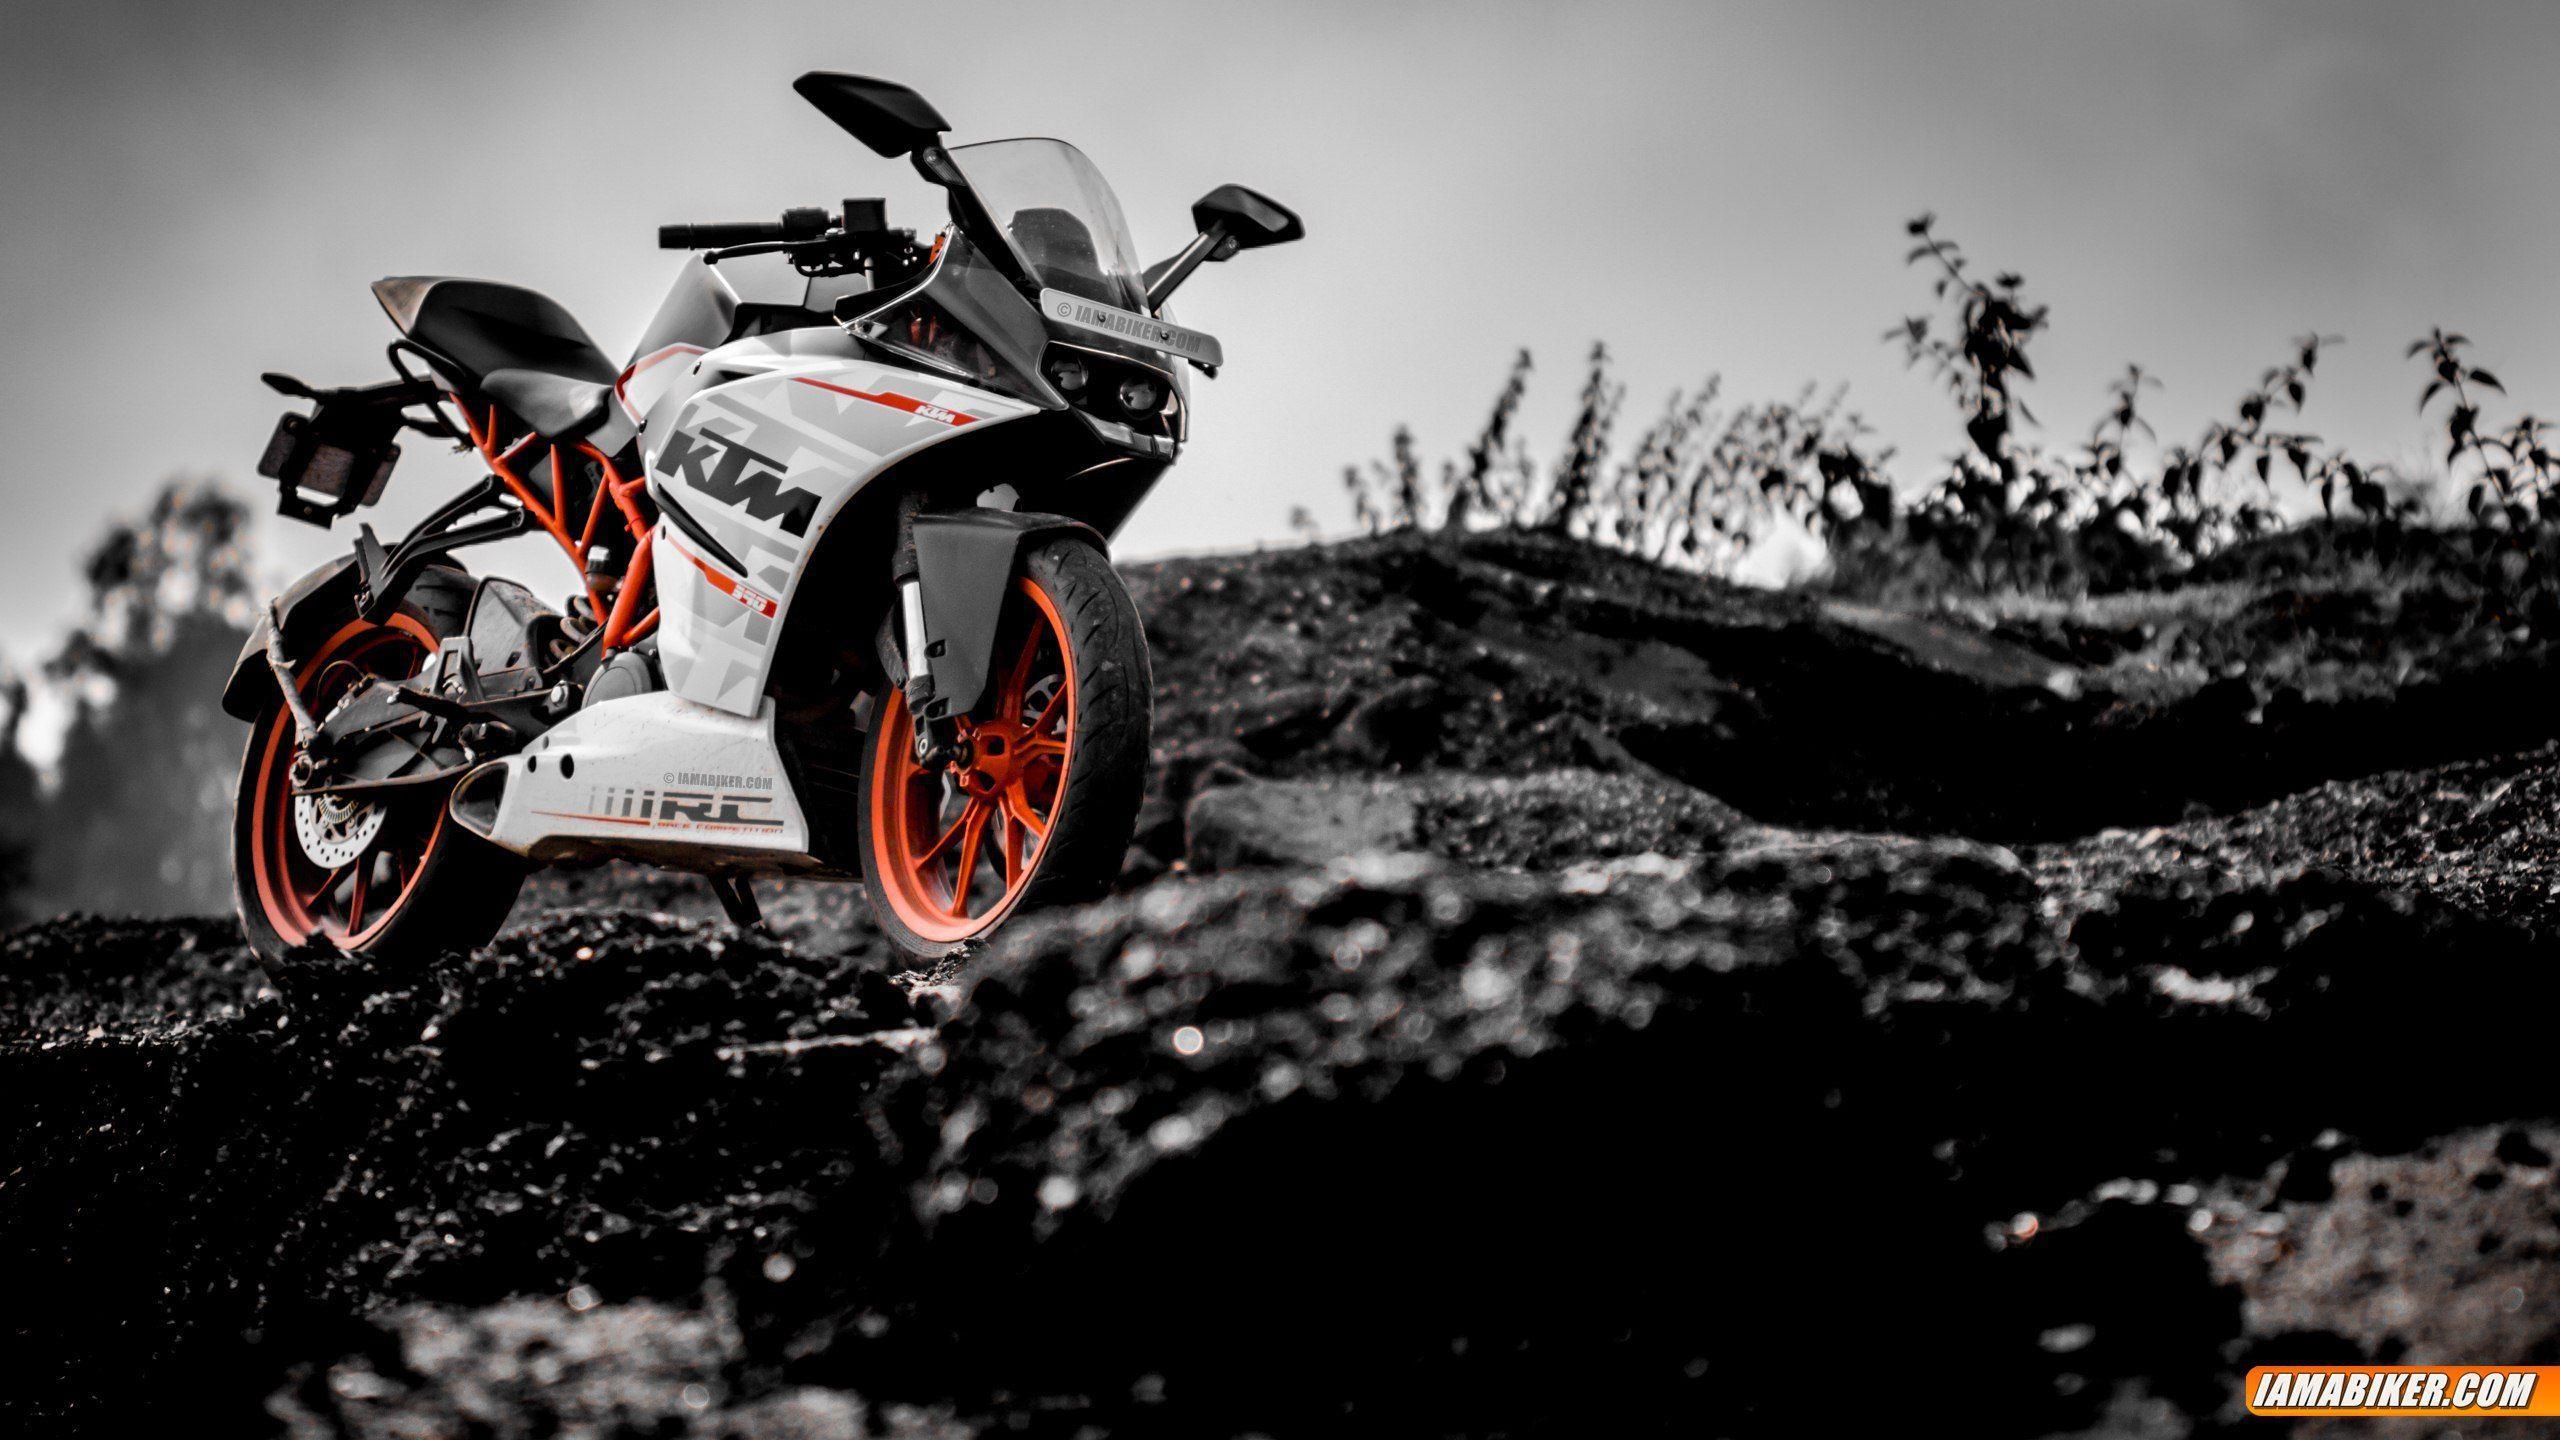 ktm rc390 ktm rc 390 wallpaper ktm rc 390 HD wallpaper ktm rc